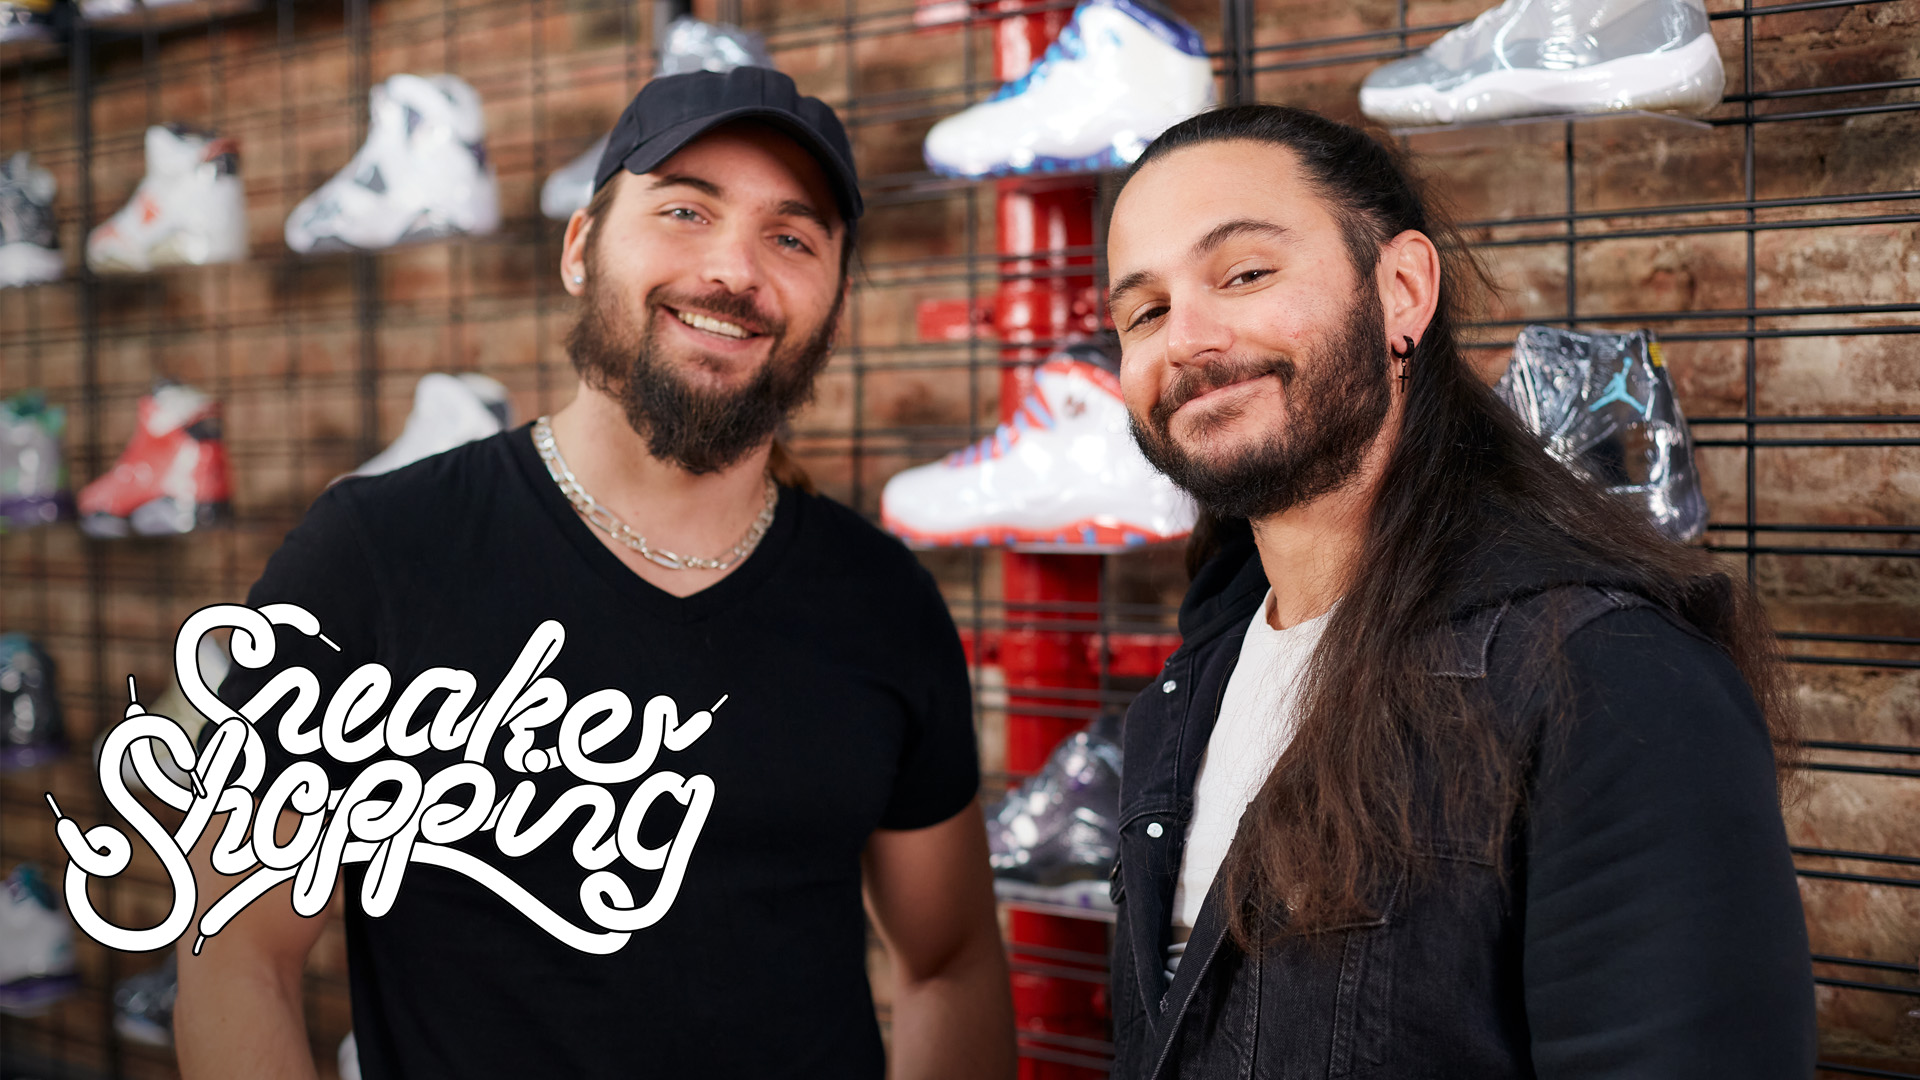 Young Bucks Continue To Tease Jeff Hardy In Aew Danhausen Shares Photo Shoot With Cm Punk